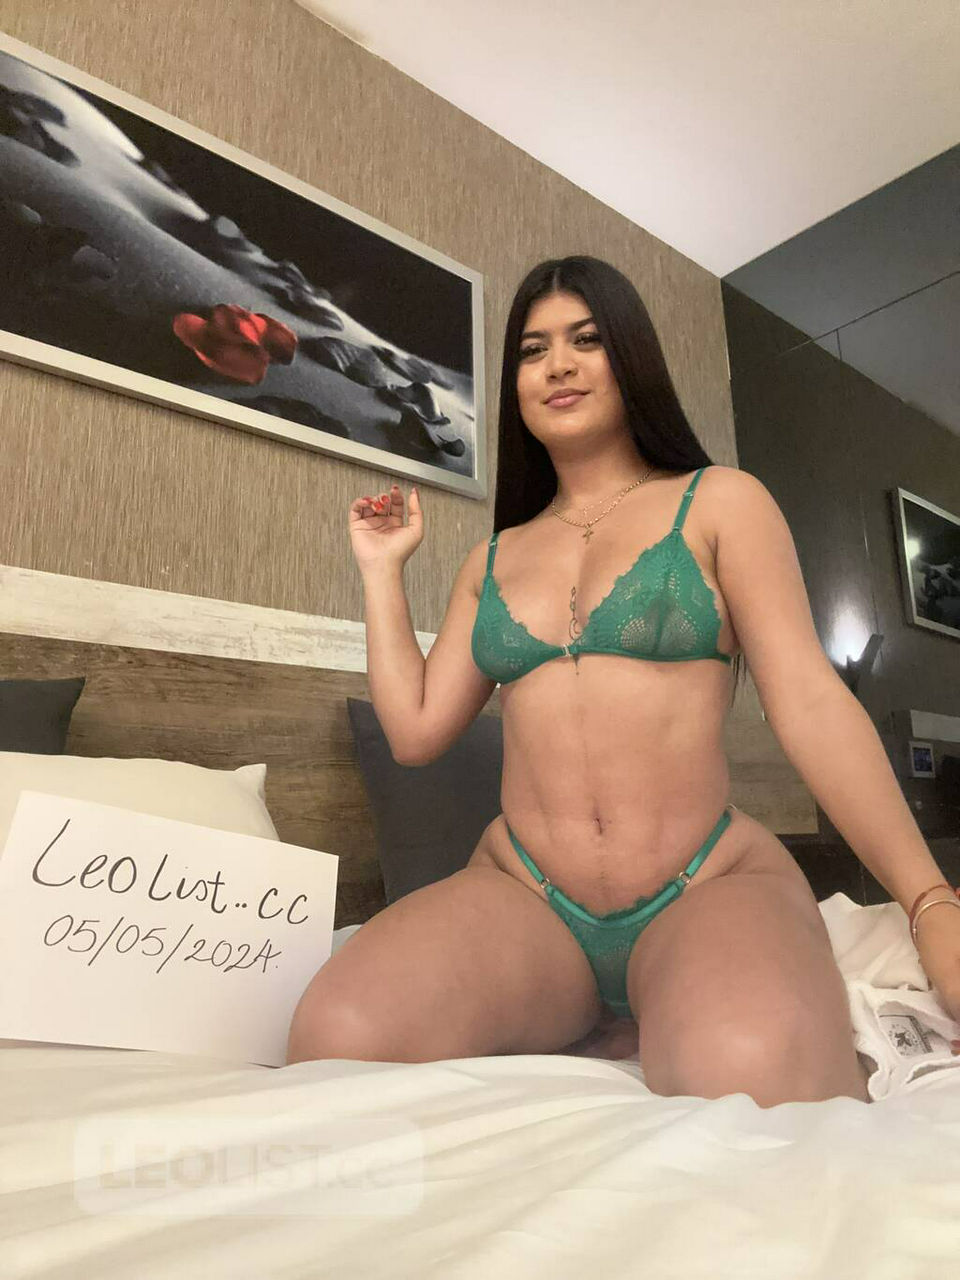 Escorts Calgary, Alberta available cash only work